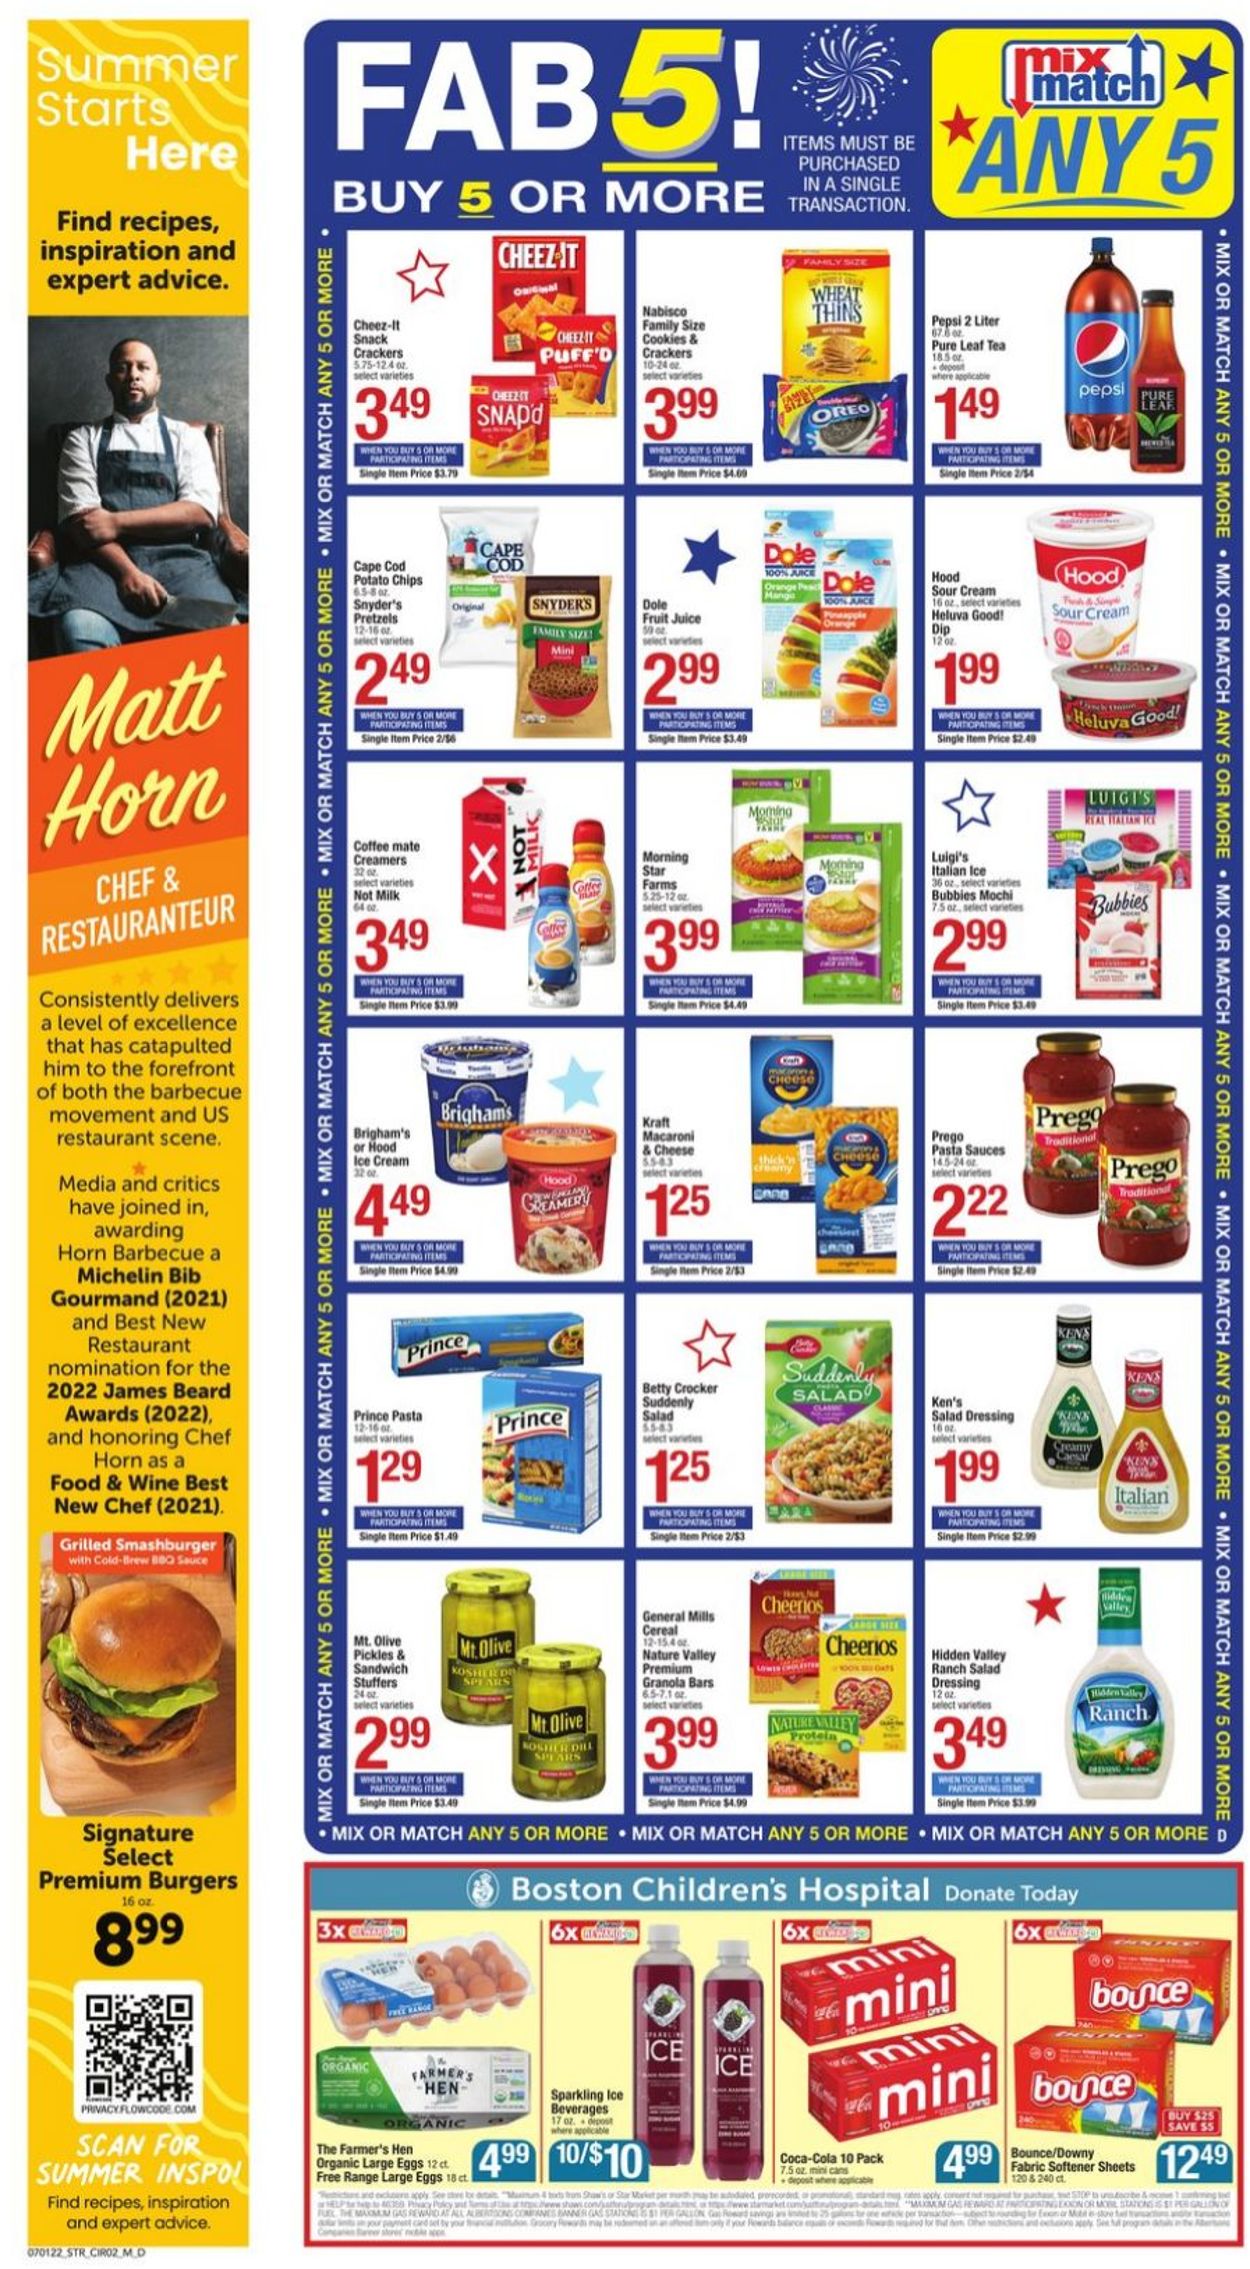 Star Market - 4th of July Sale Weekly Ad Circular - valid 07/01-07/07/2022 (Page 2)